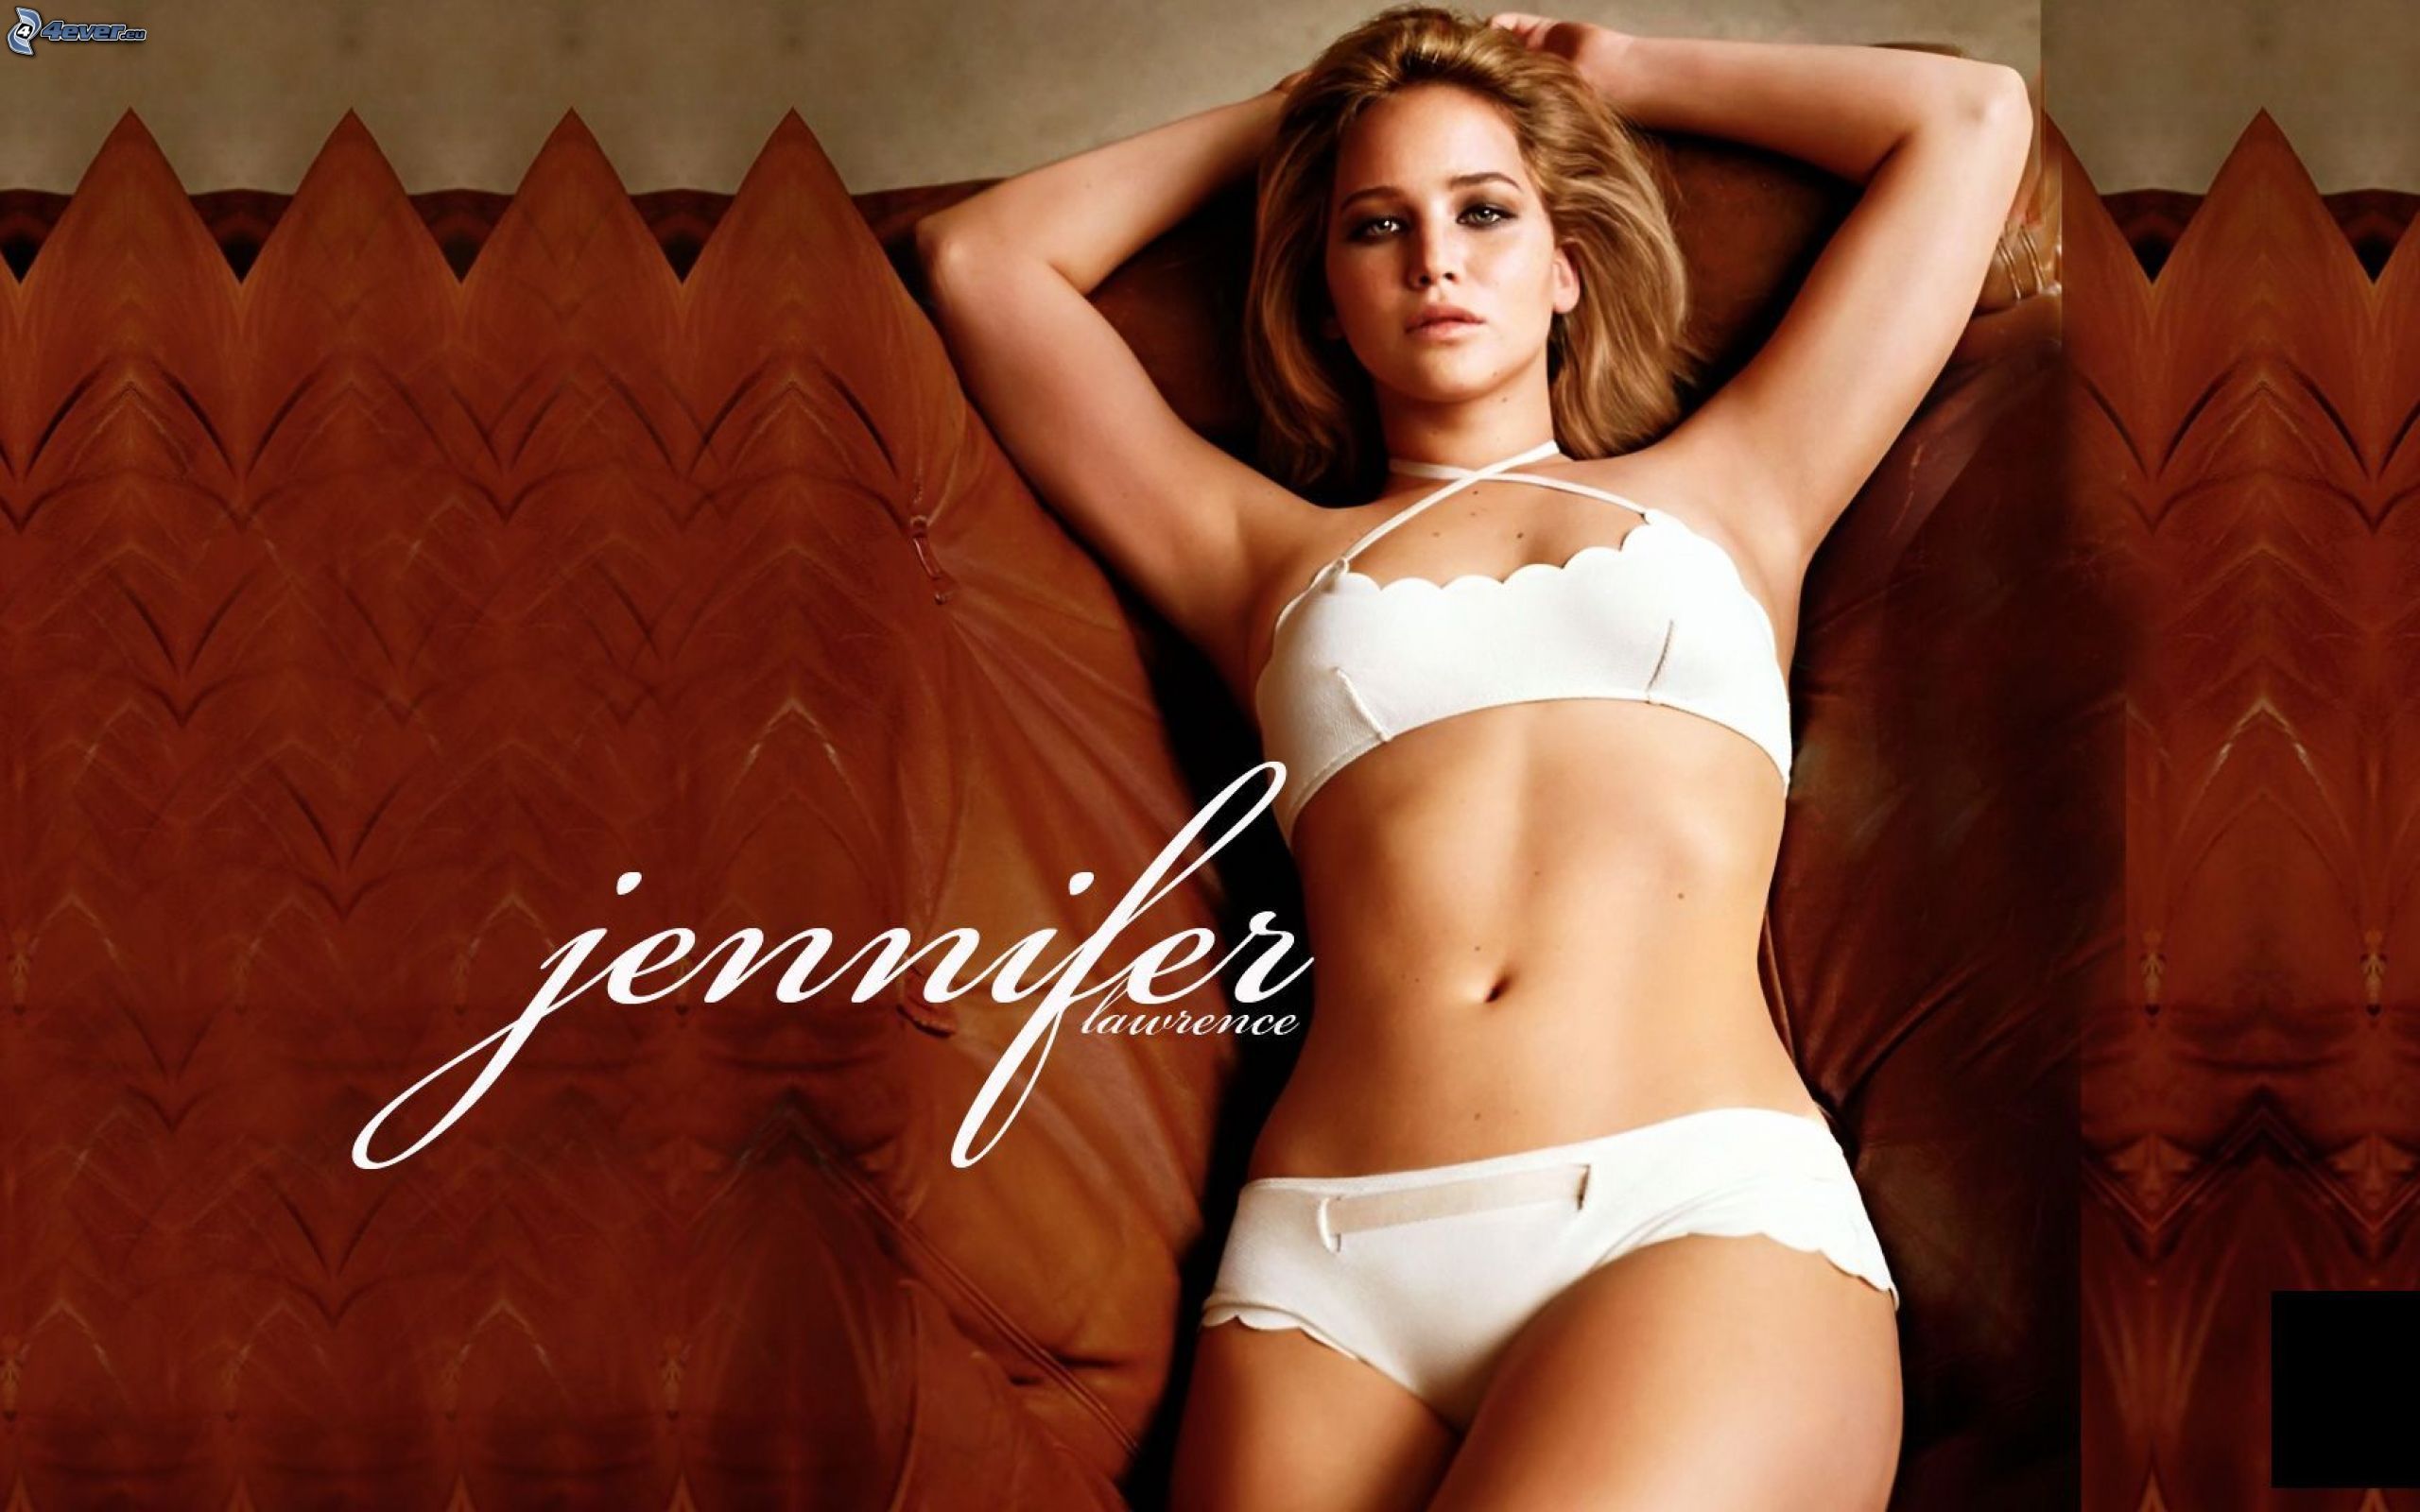 beatrice gregory recommends jennifer lawrence in underwear pic